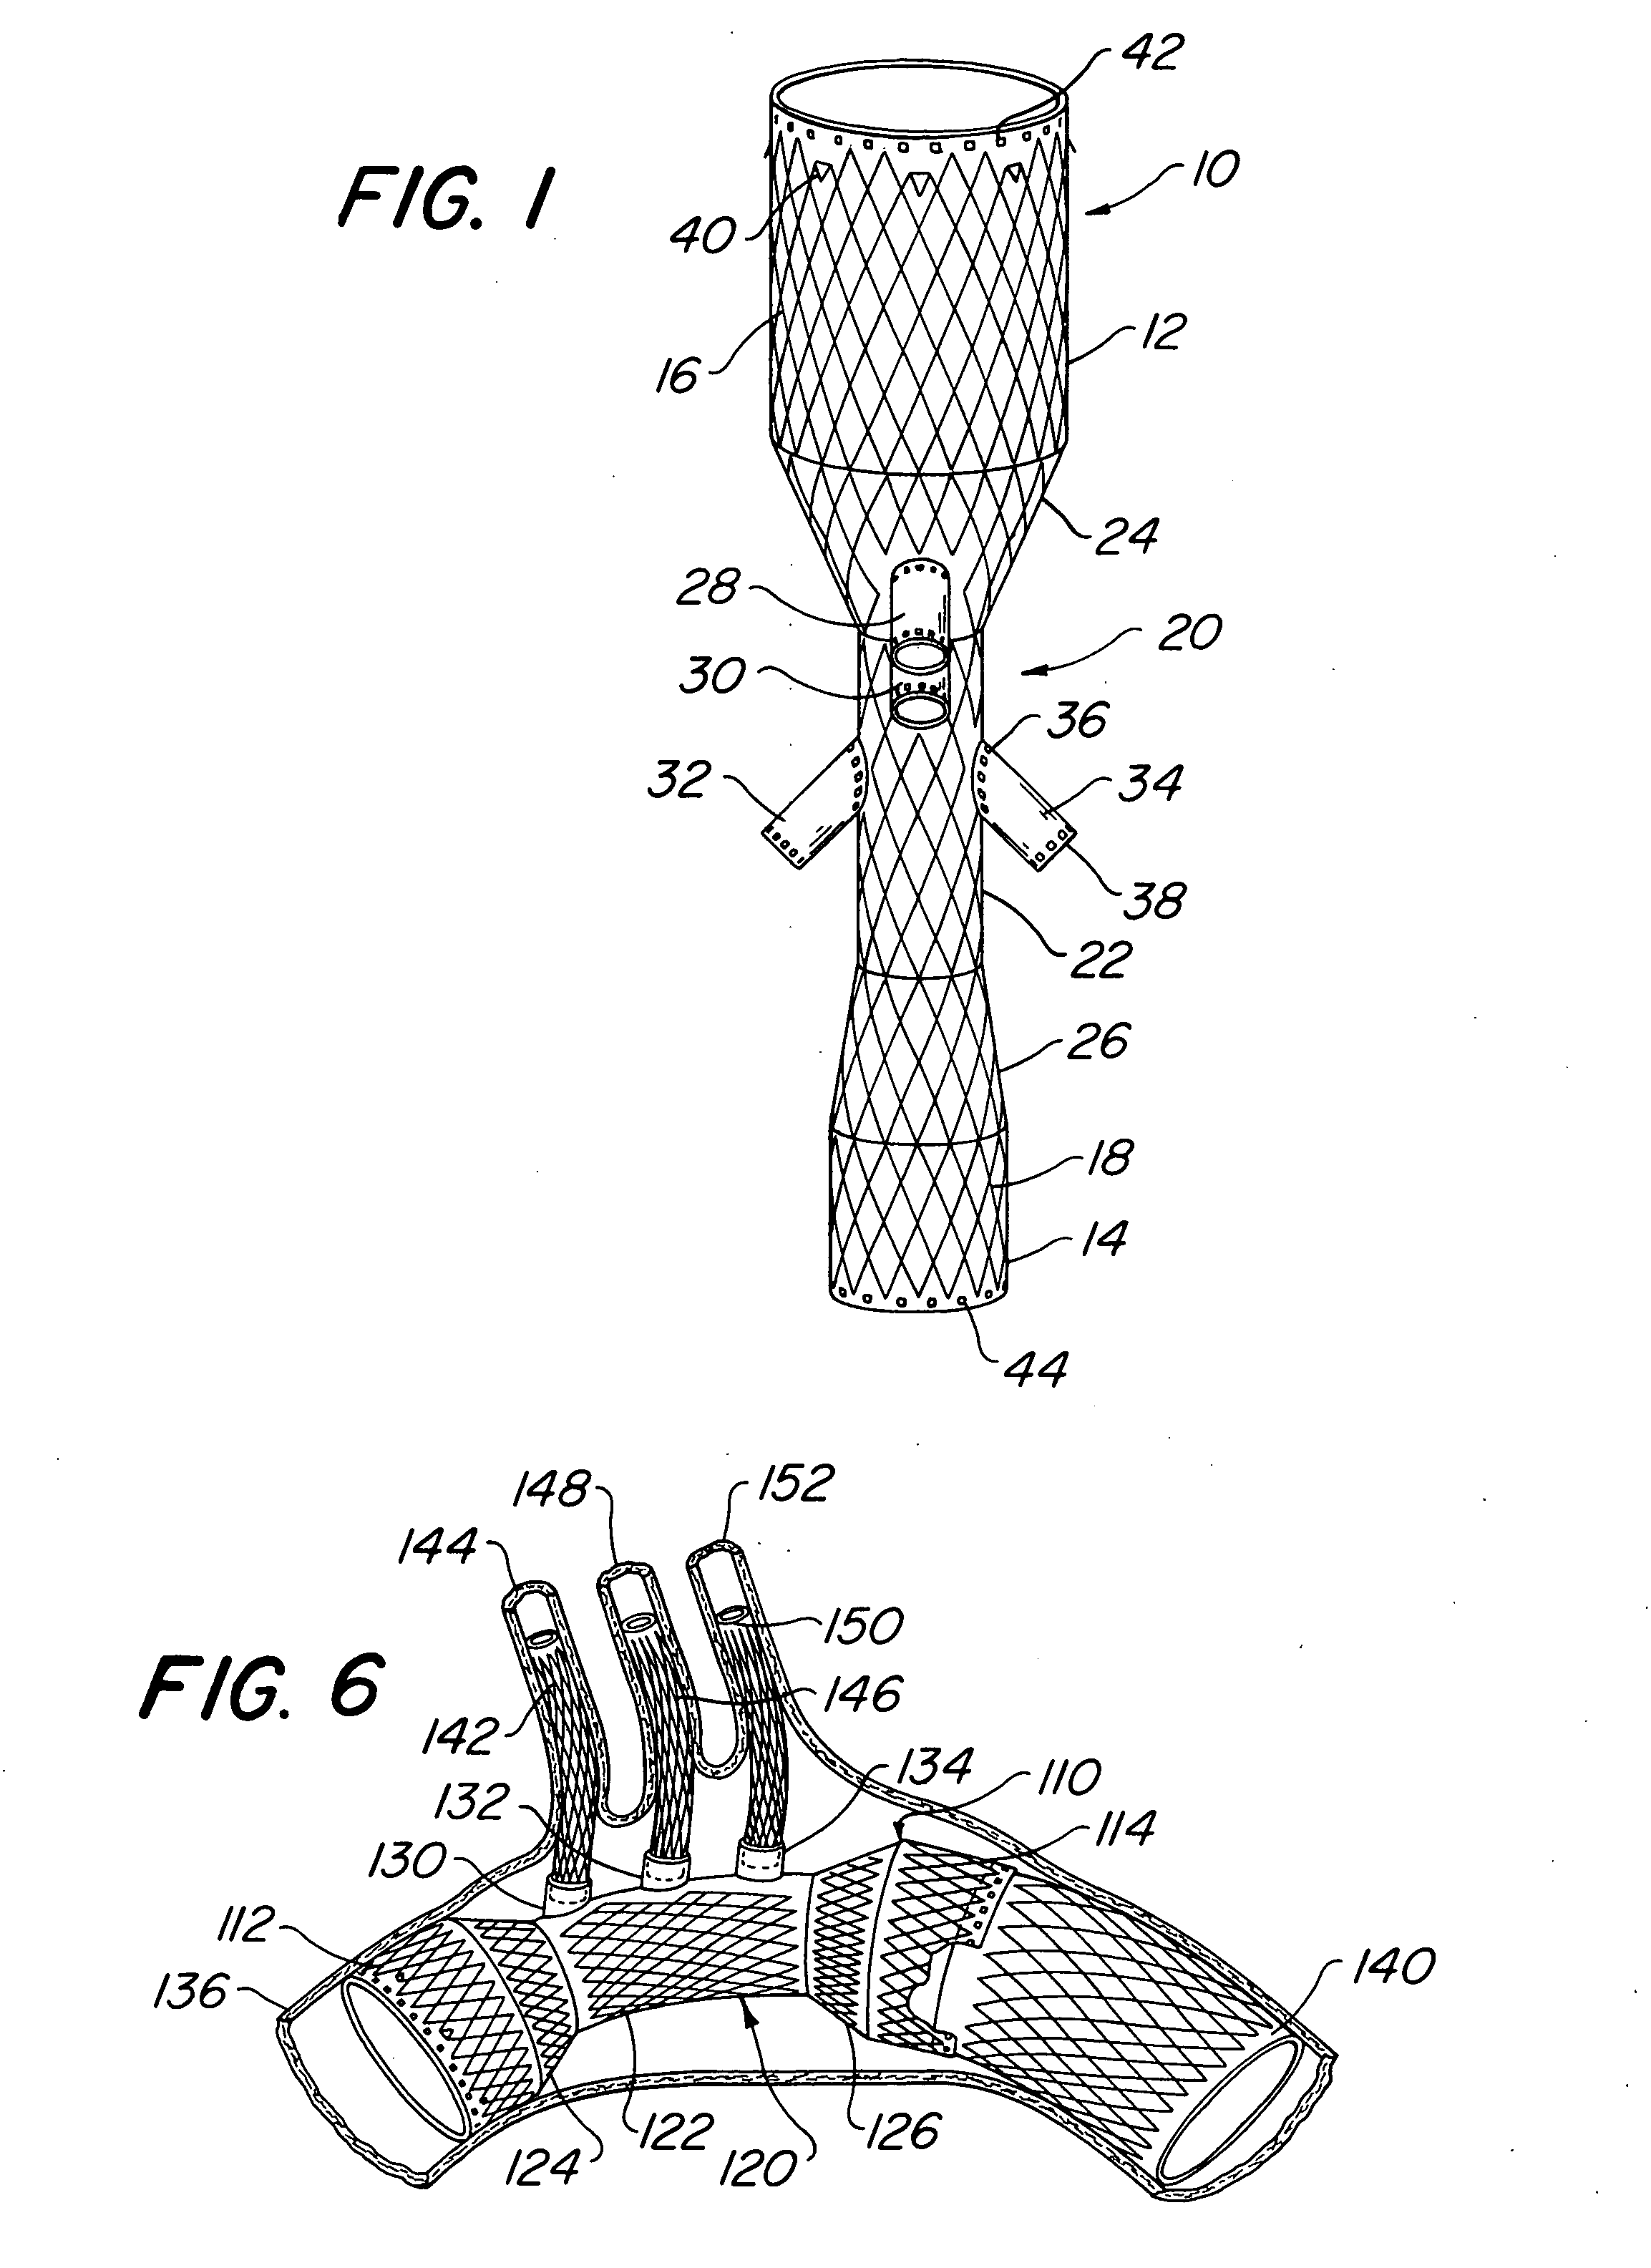 Endovascular prosthesis, system and method